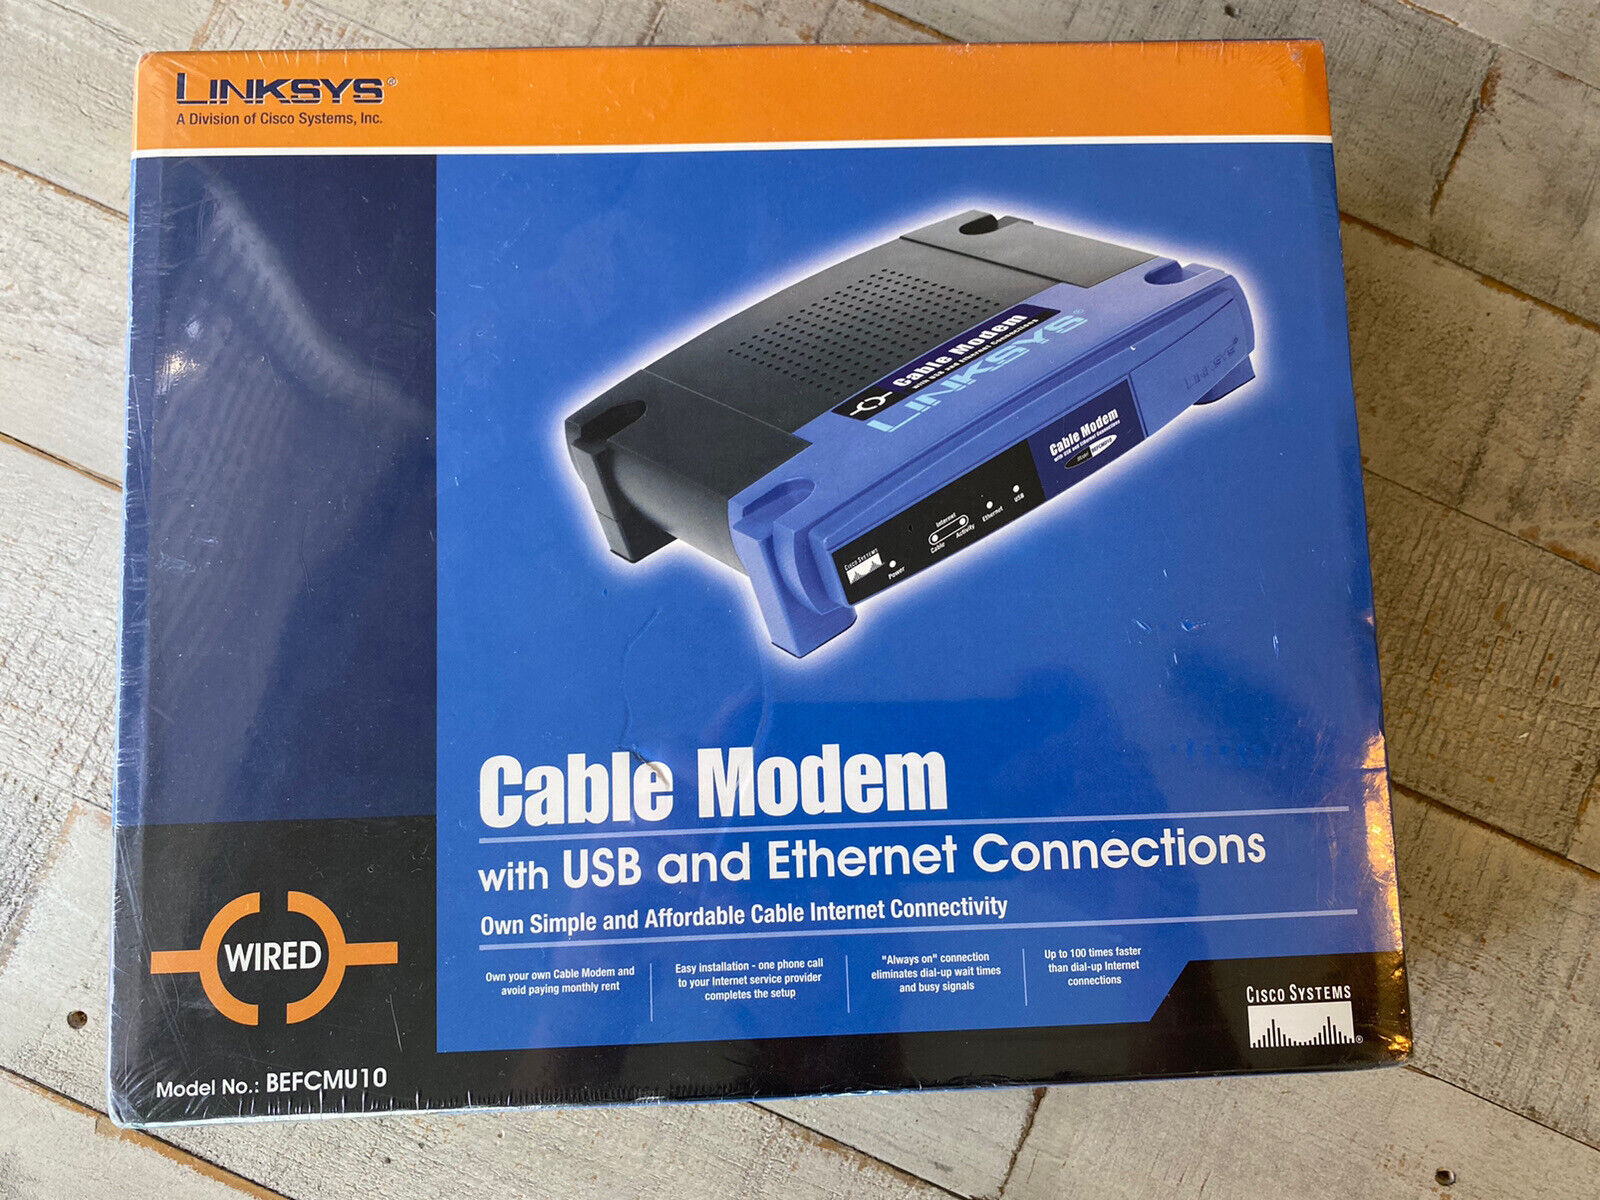 Linksys BEFCMU10 Black Blue Wired Cable Modem with USB and Ethernet Connections 